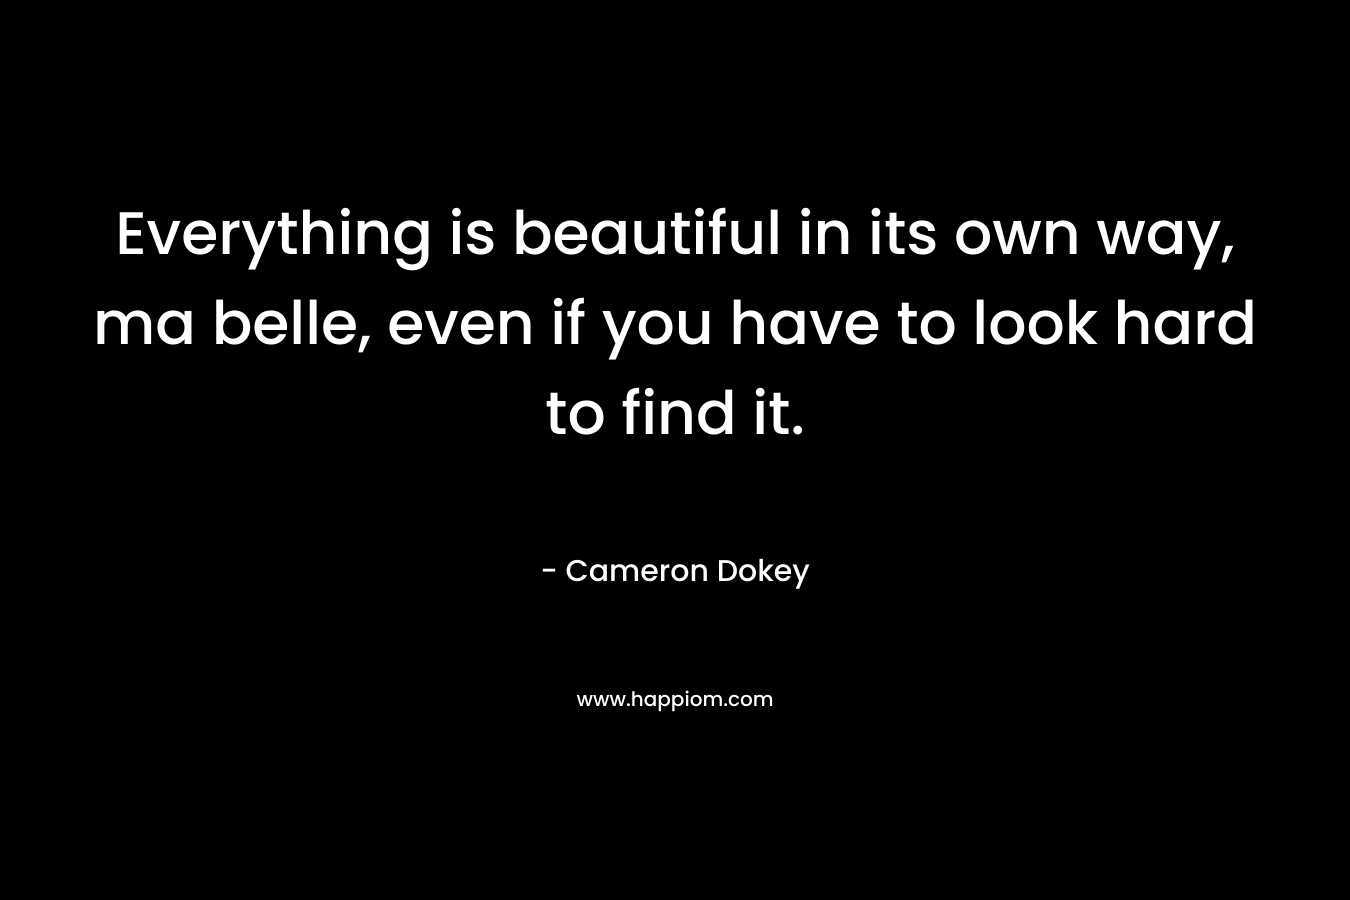 Everything is beautiful in its own way, ma belle, even if you have to look hard to find it. – Cameron Dokey